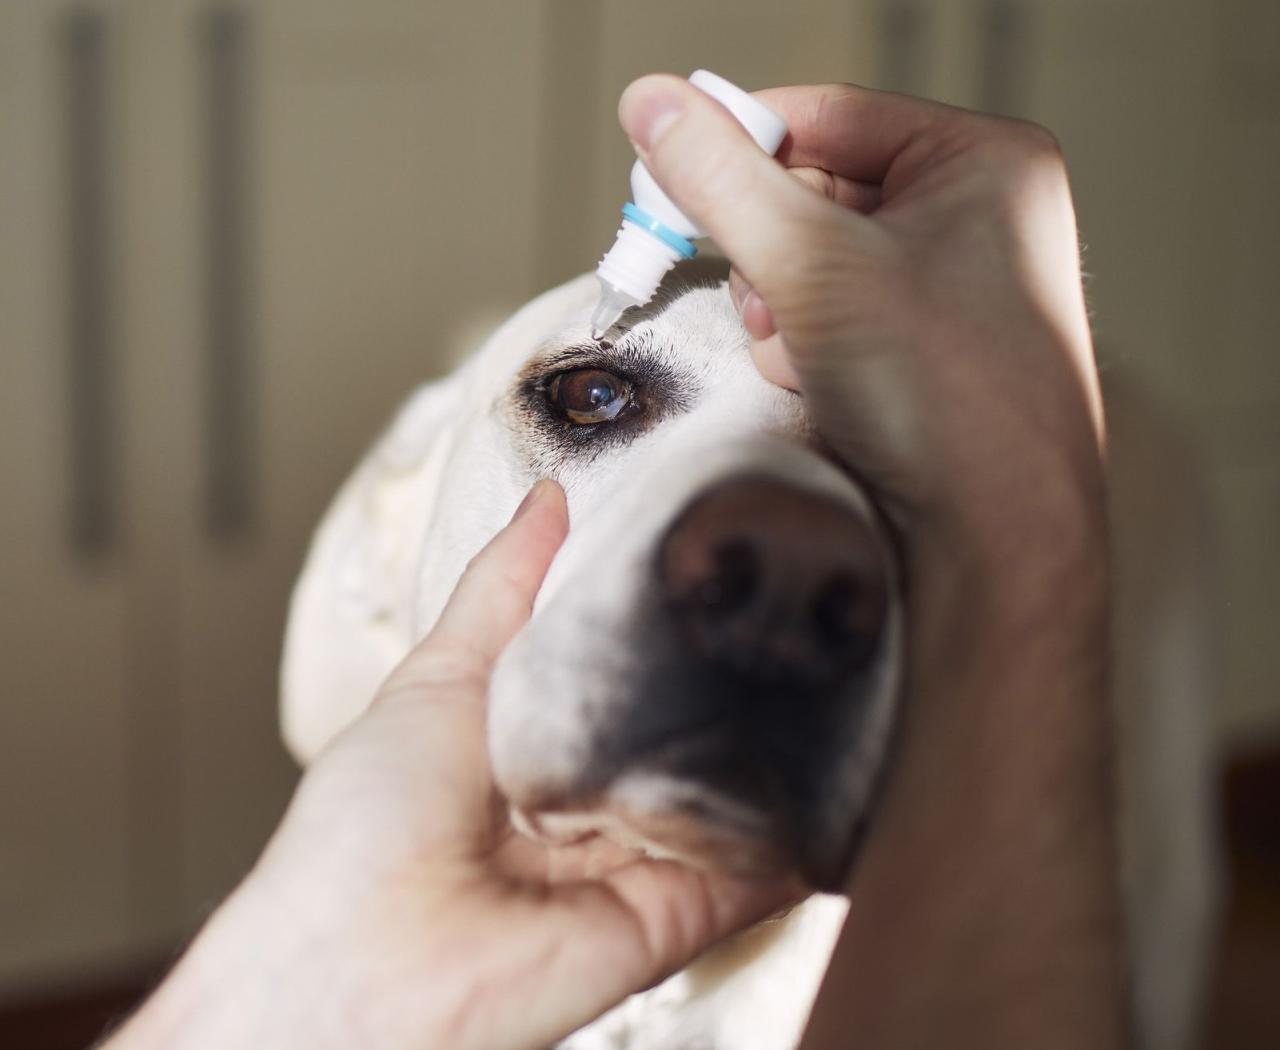 Eye Drops For Dogs - Whole Dog Journal